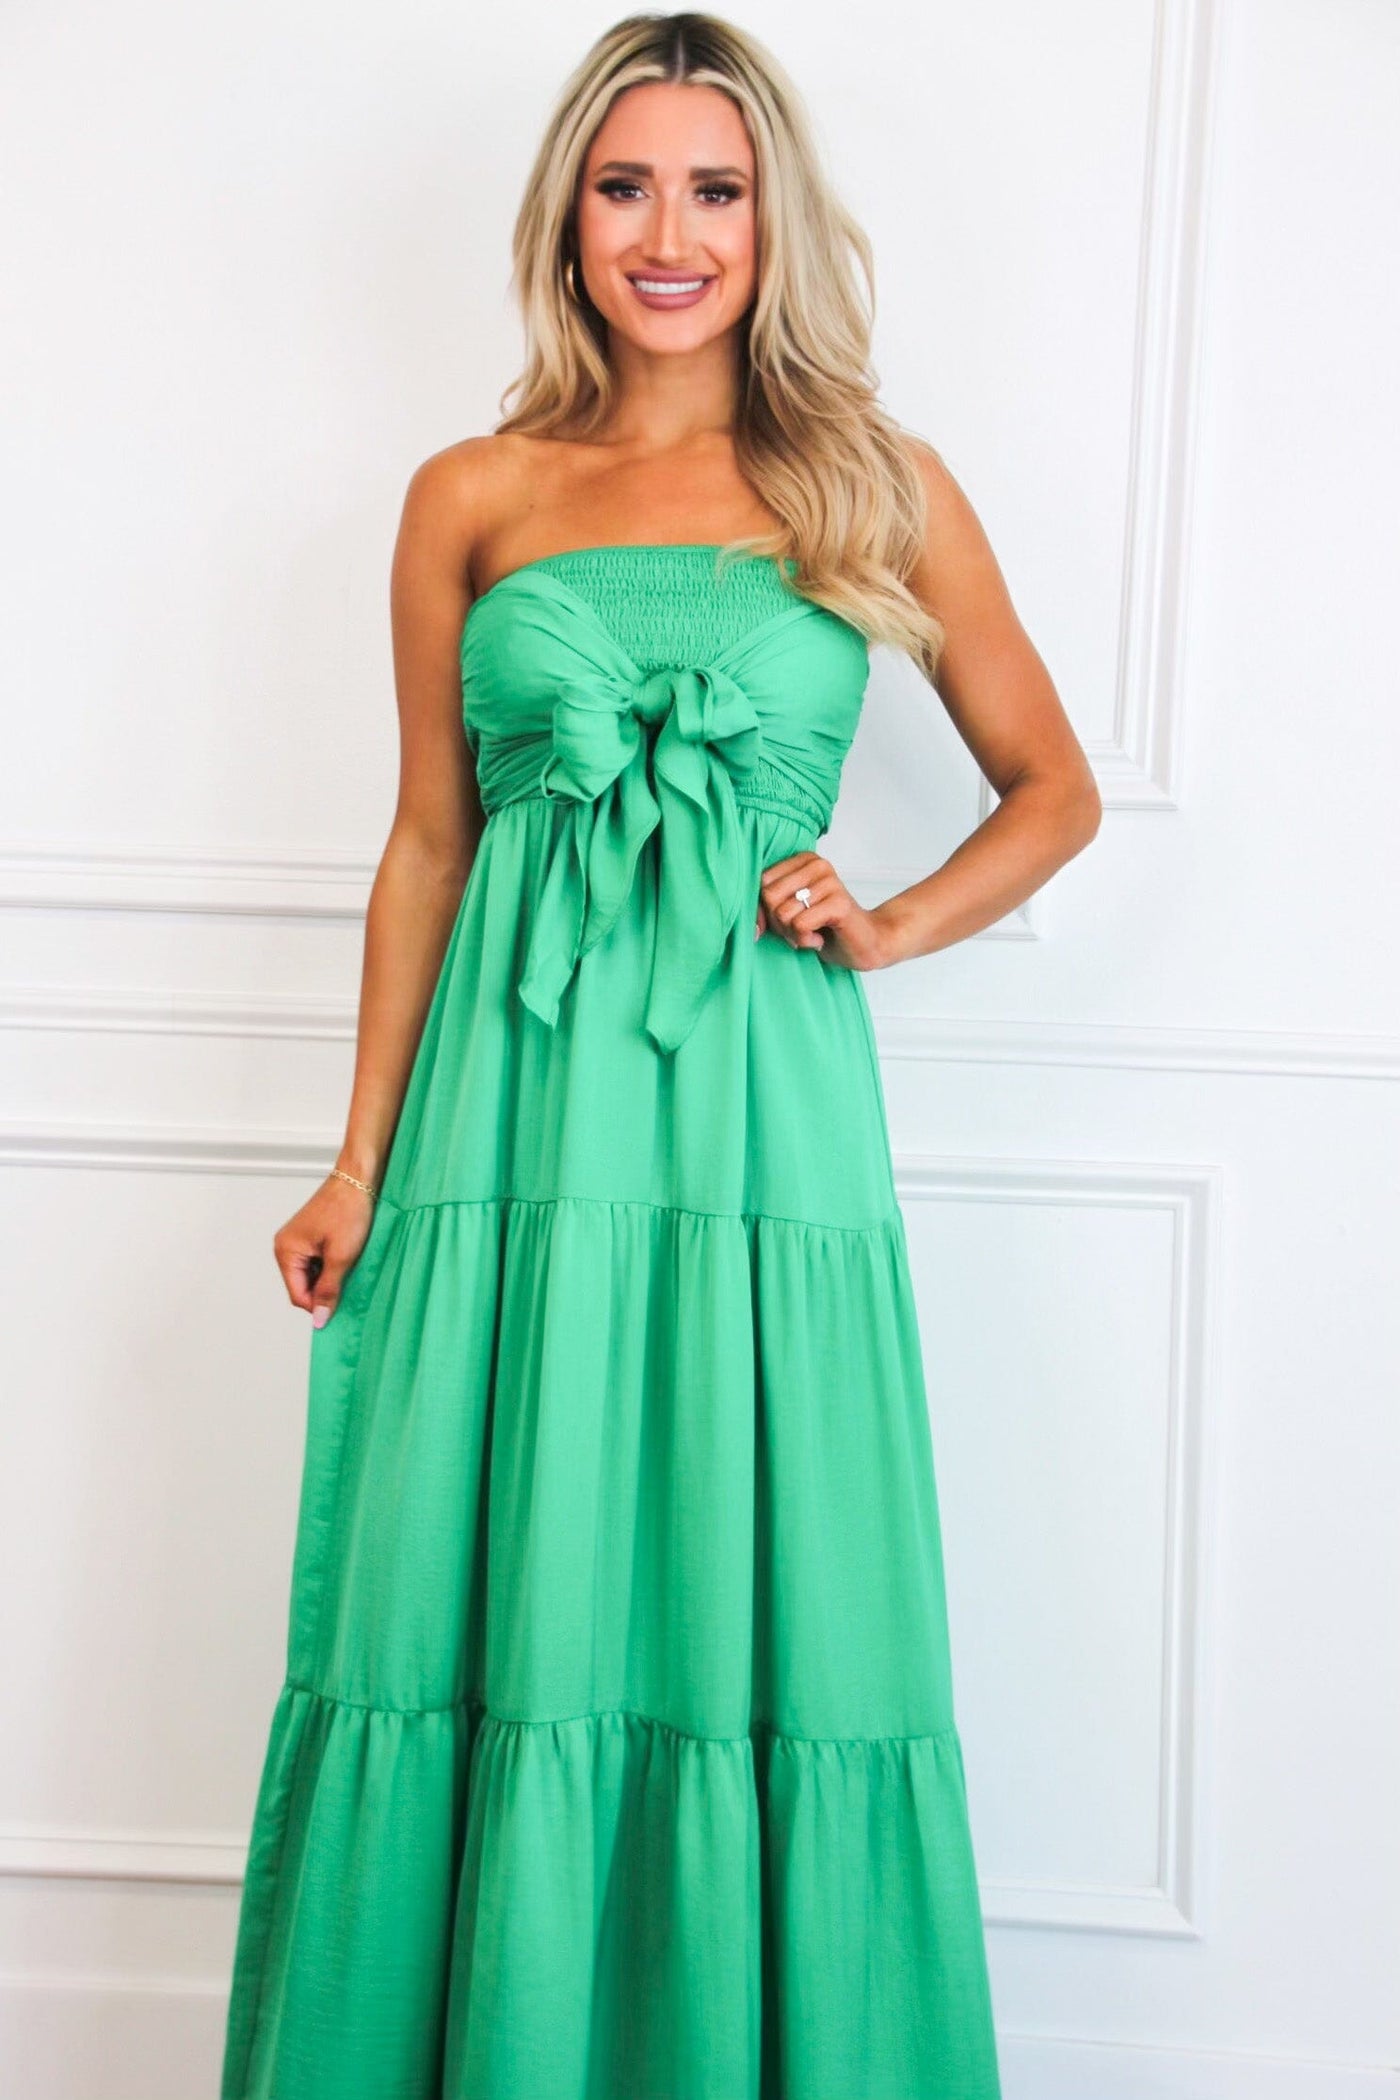 Santorini Sweetheart Smocked Maxi Dress: Green - Bella and Bloom Boutique